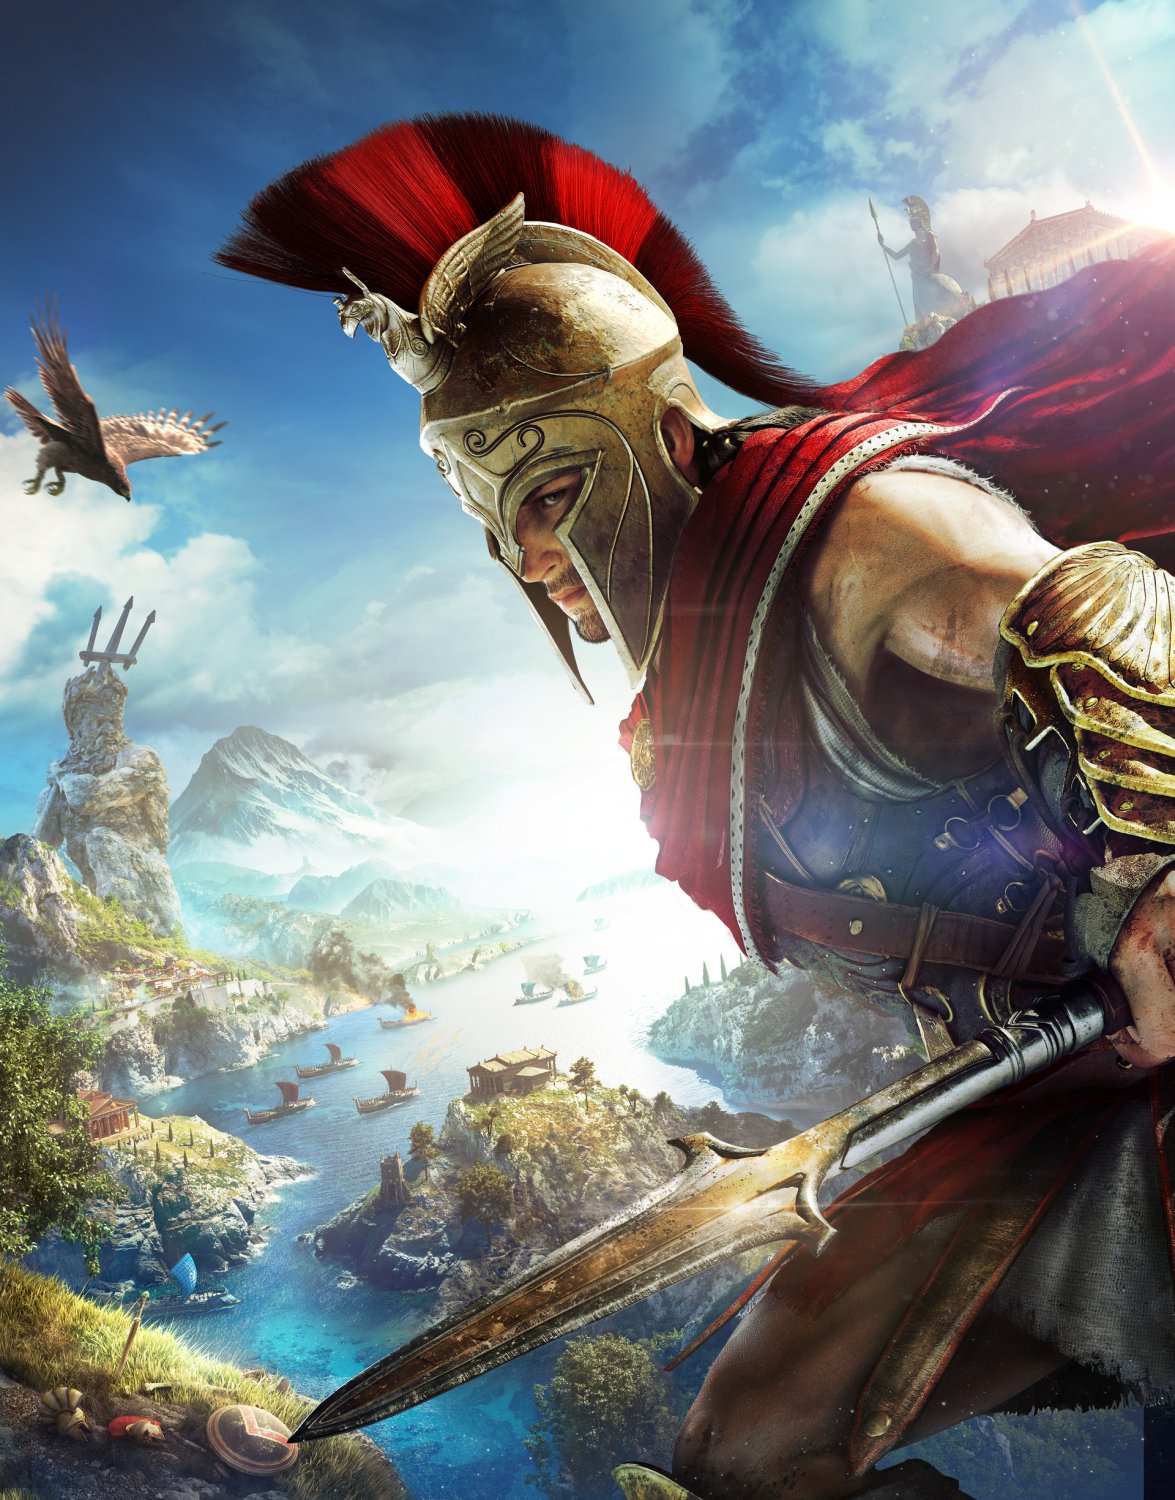 Assassin's Creed Odyssey  13"x19" (32cm/49cm) Polyester Fabric Poster